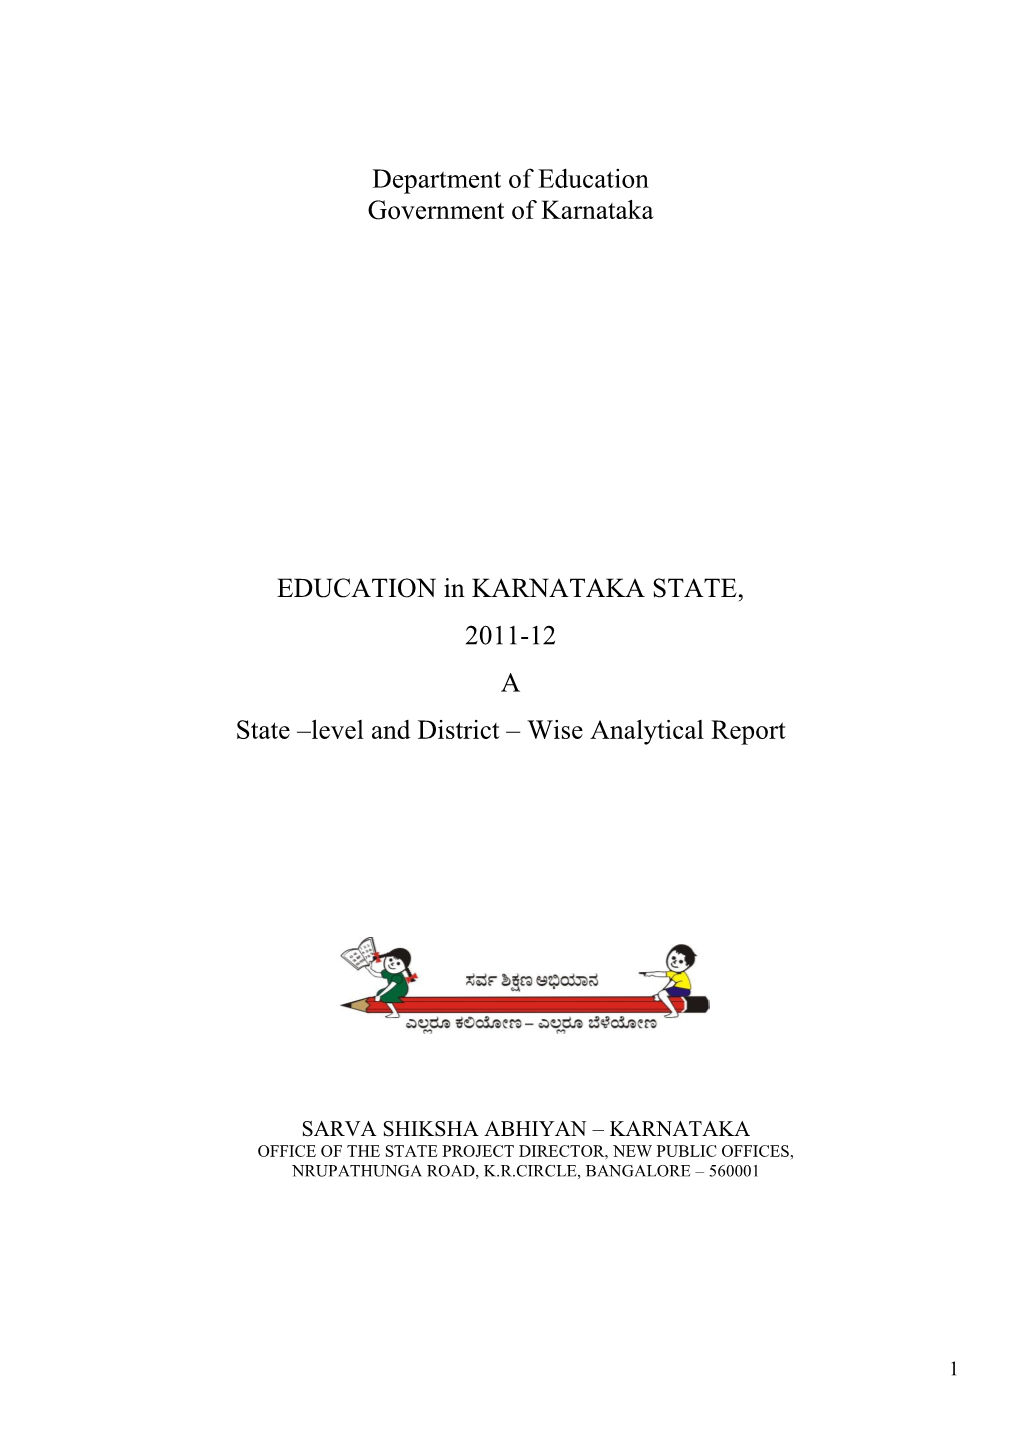 Department of Education Government of Karnataka EDUCATION In